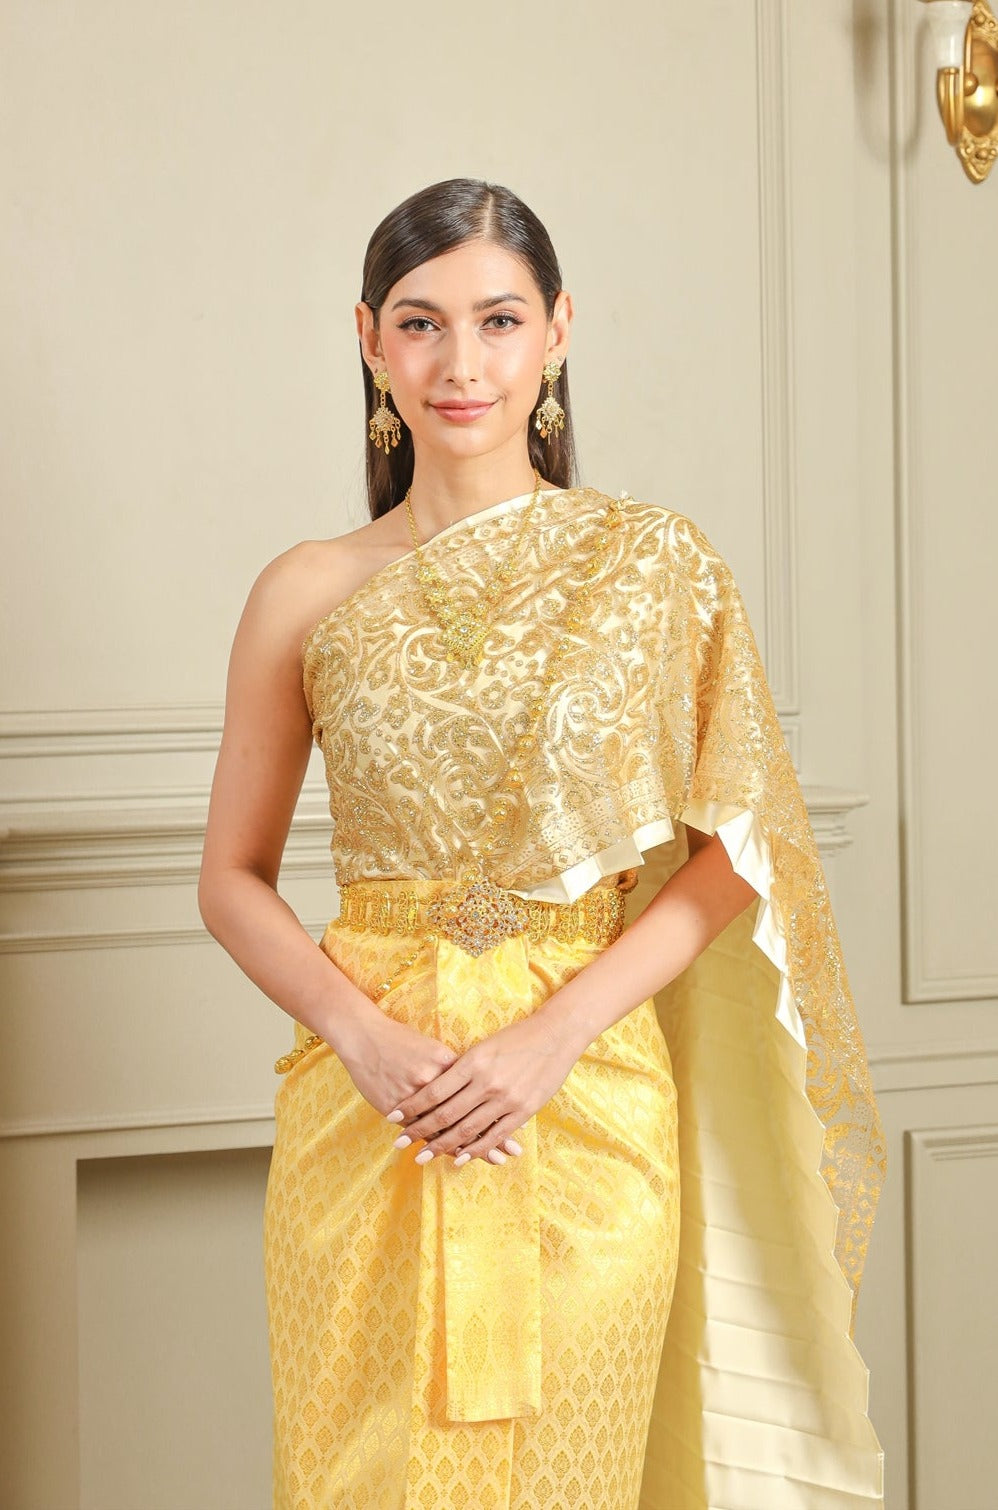 A woman wearing our gold traditional Thai dress.